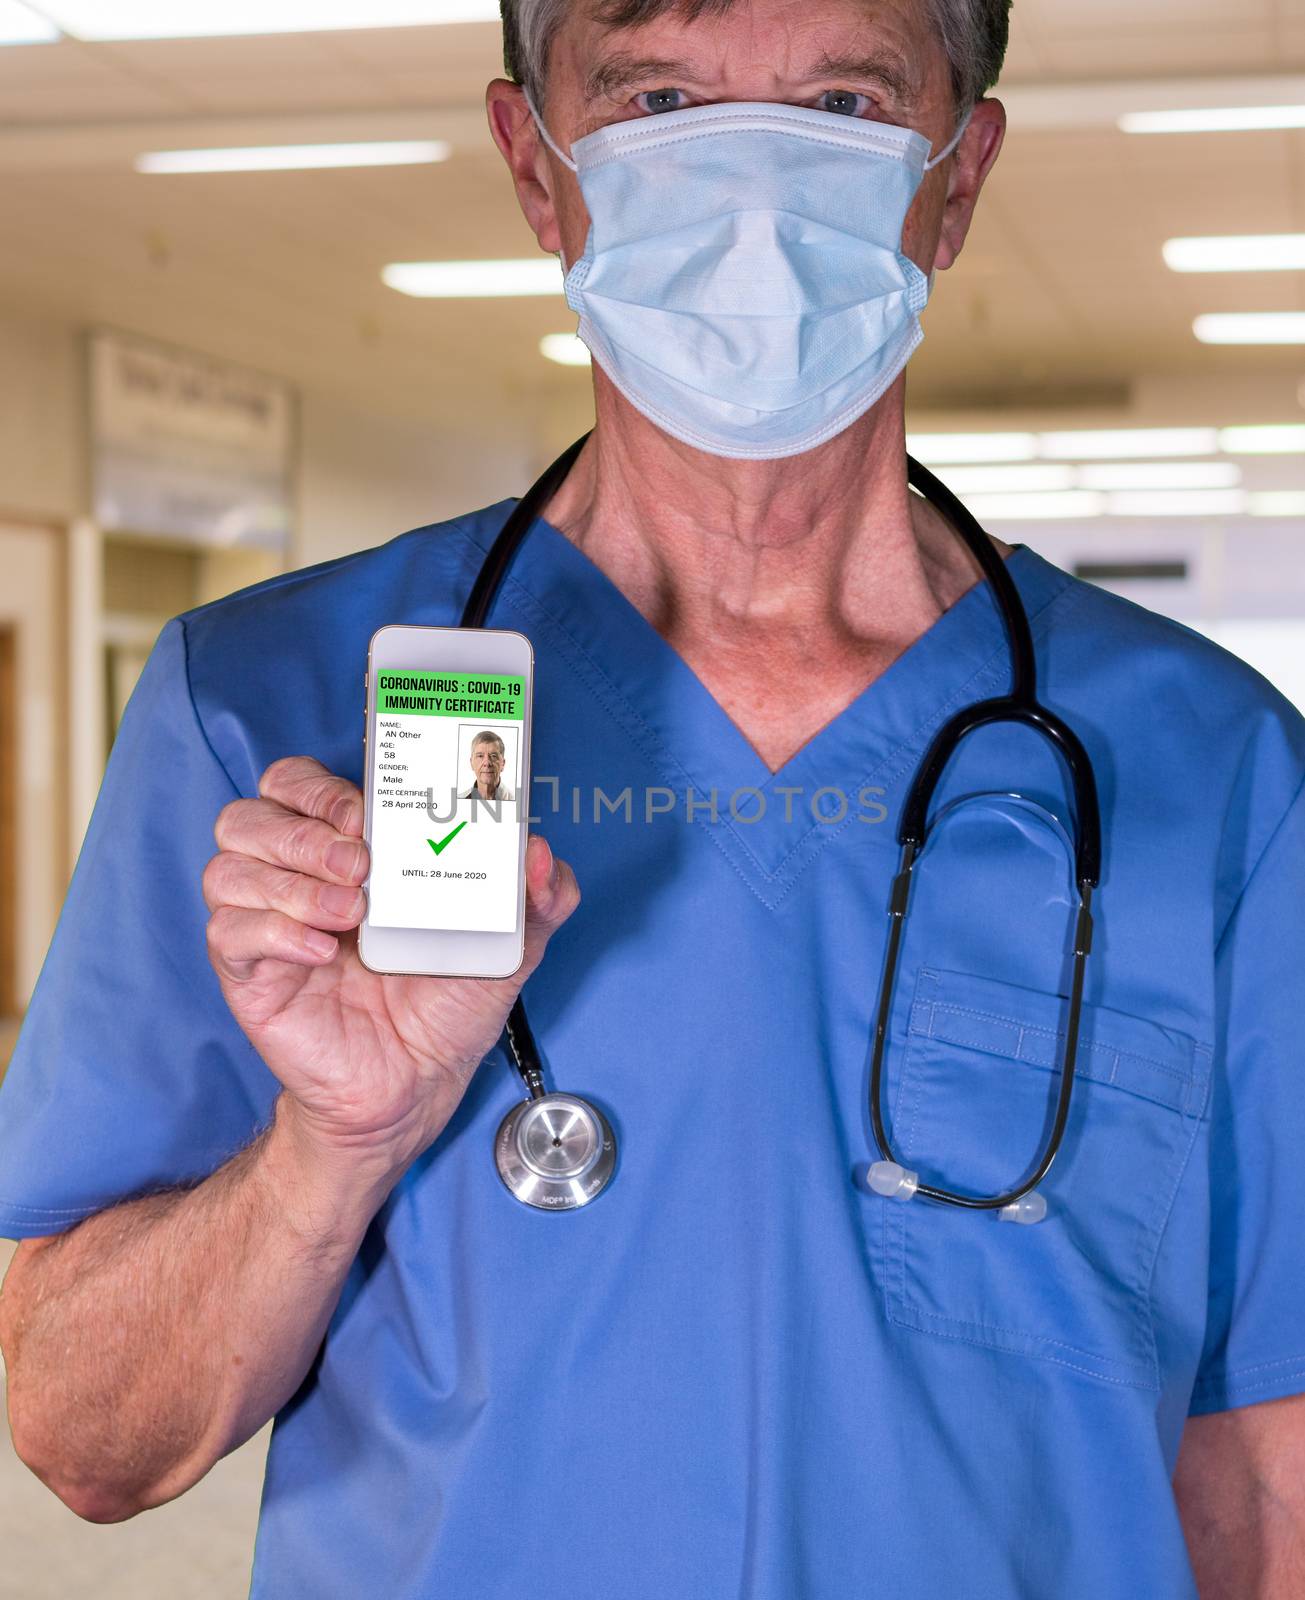 Male doctor concept of immunity testing and certification on smartphone app to allow people to go back to work after negative test